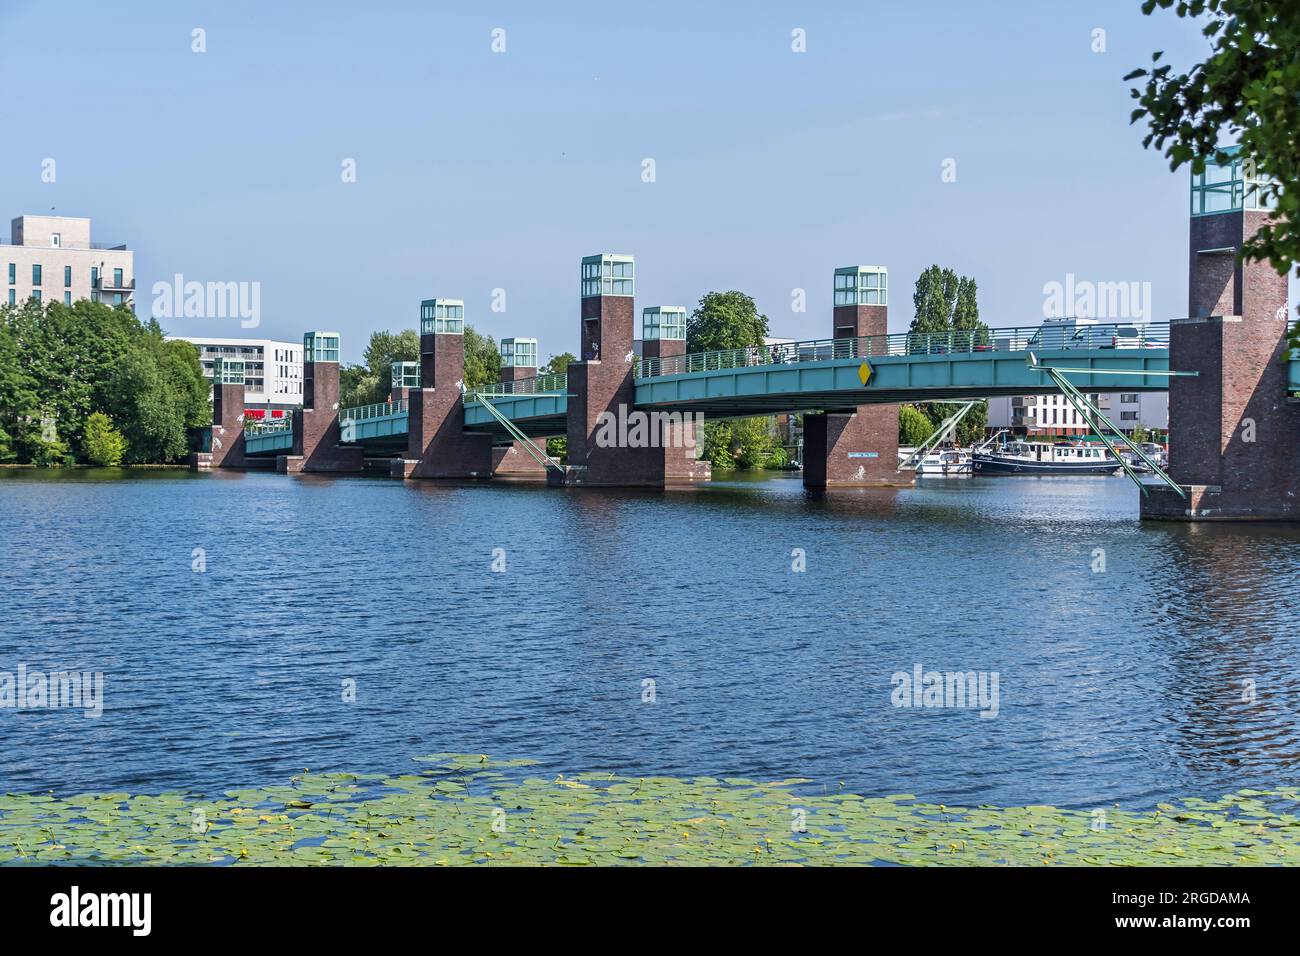 Berlin, Germany - June 13, 2023: Steel girder bridge Spandauer-See Bruecke over the River Havel connects the parts of the Wasserstadt Oberhavel, which Stock Photo